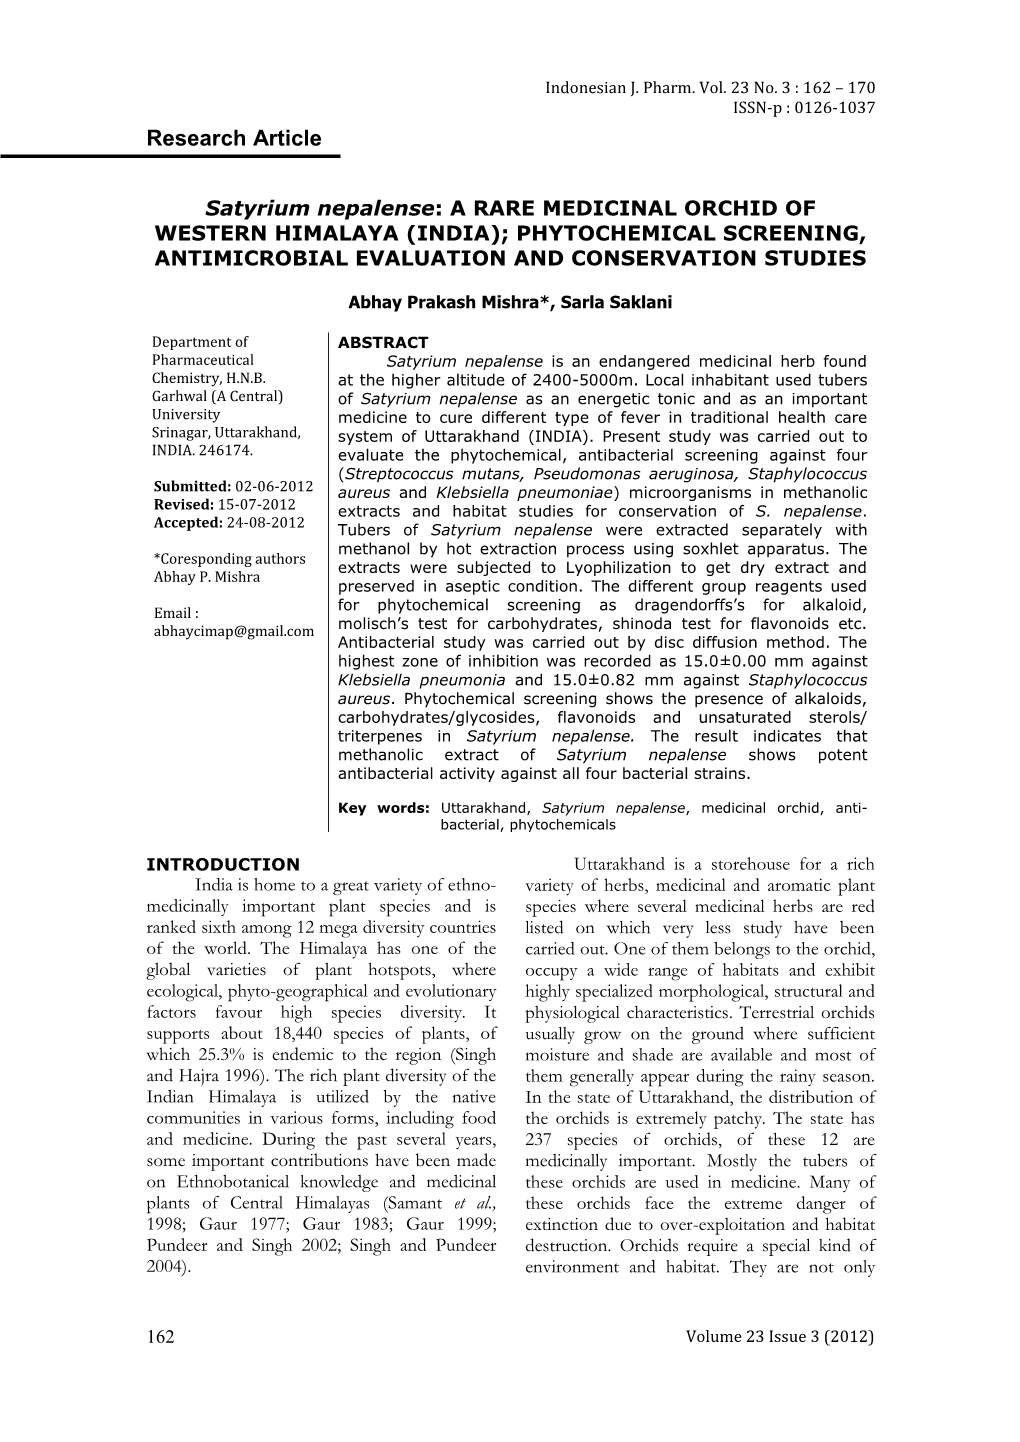 Satyrium Nepalense: a RARE MEDICINAL ORCHID of WESTERN HIMALAYA (INDIA); PHYTOCHEMICAL SCREENING, ANTIMICROBIAL EVALUATION and CONSERVATION STUDIES